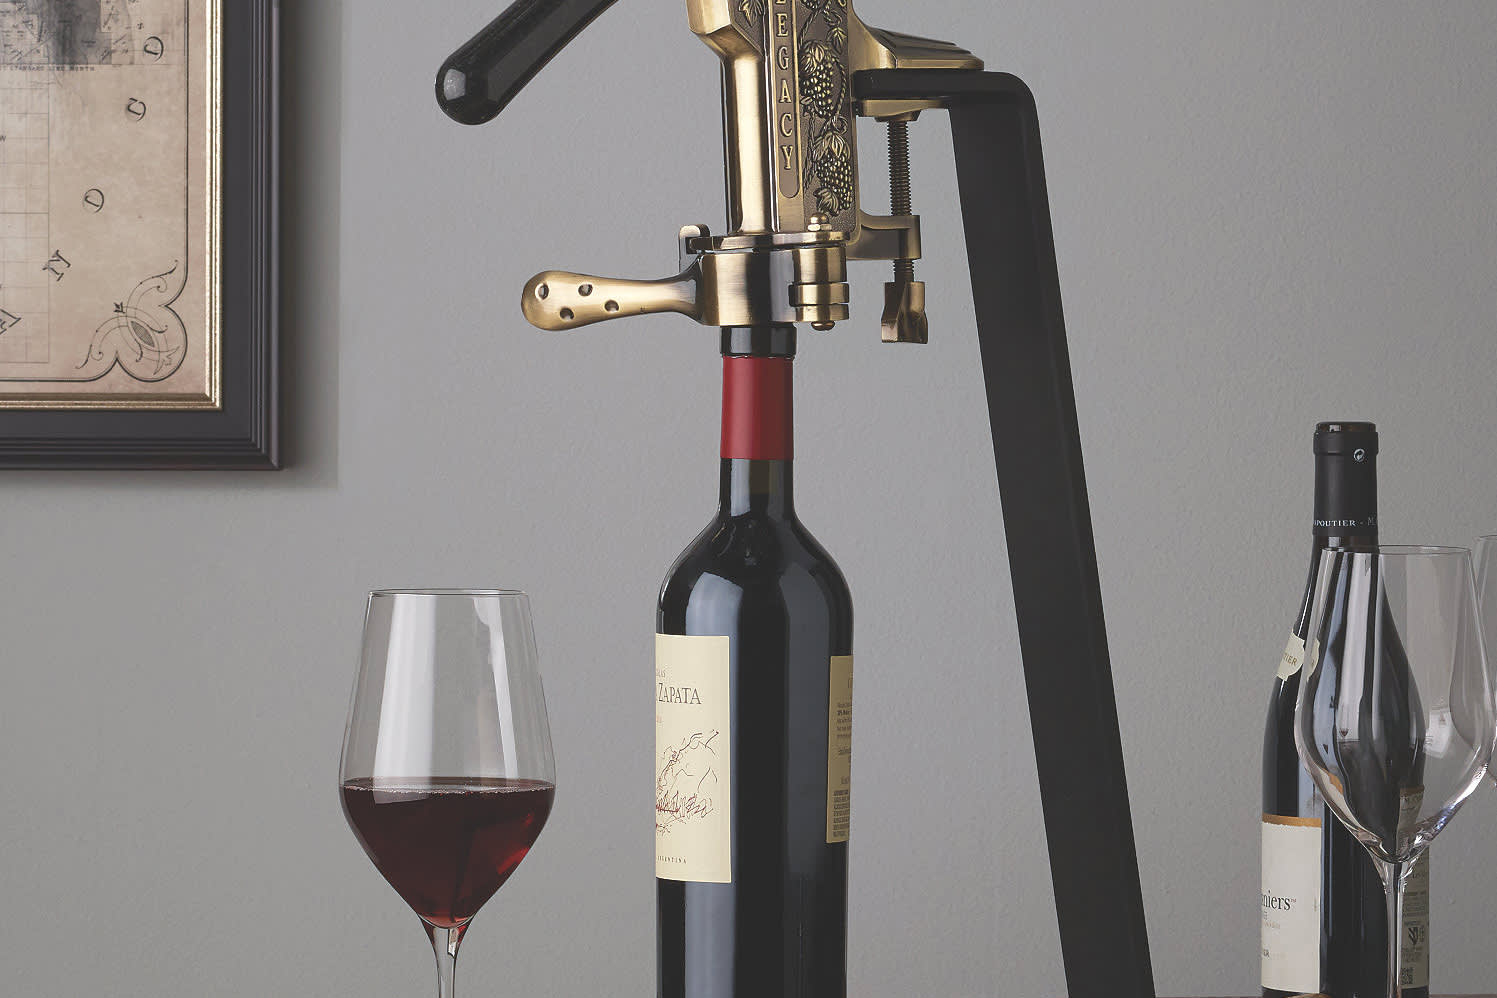 Wine Bottle Opener Types: Which Kind Is Right For You? %%sep